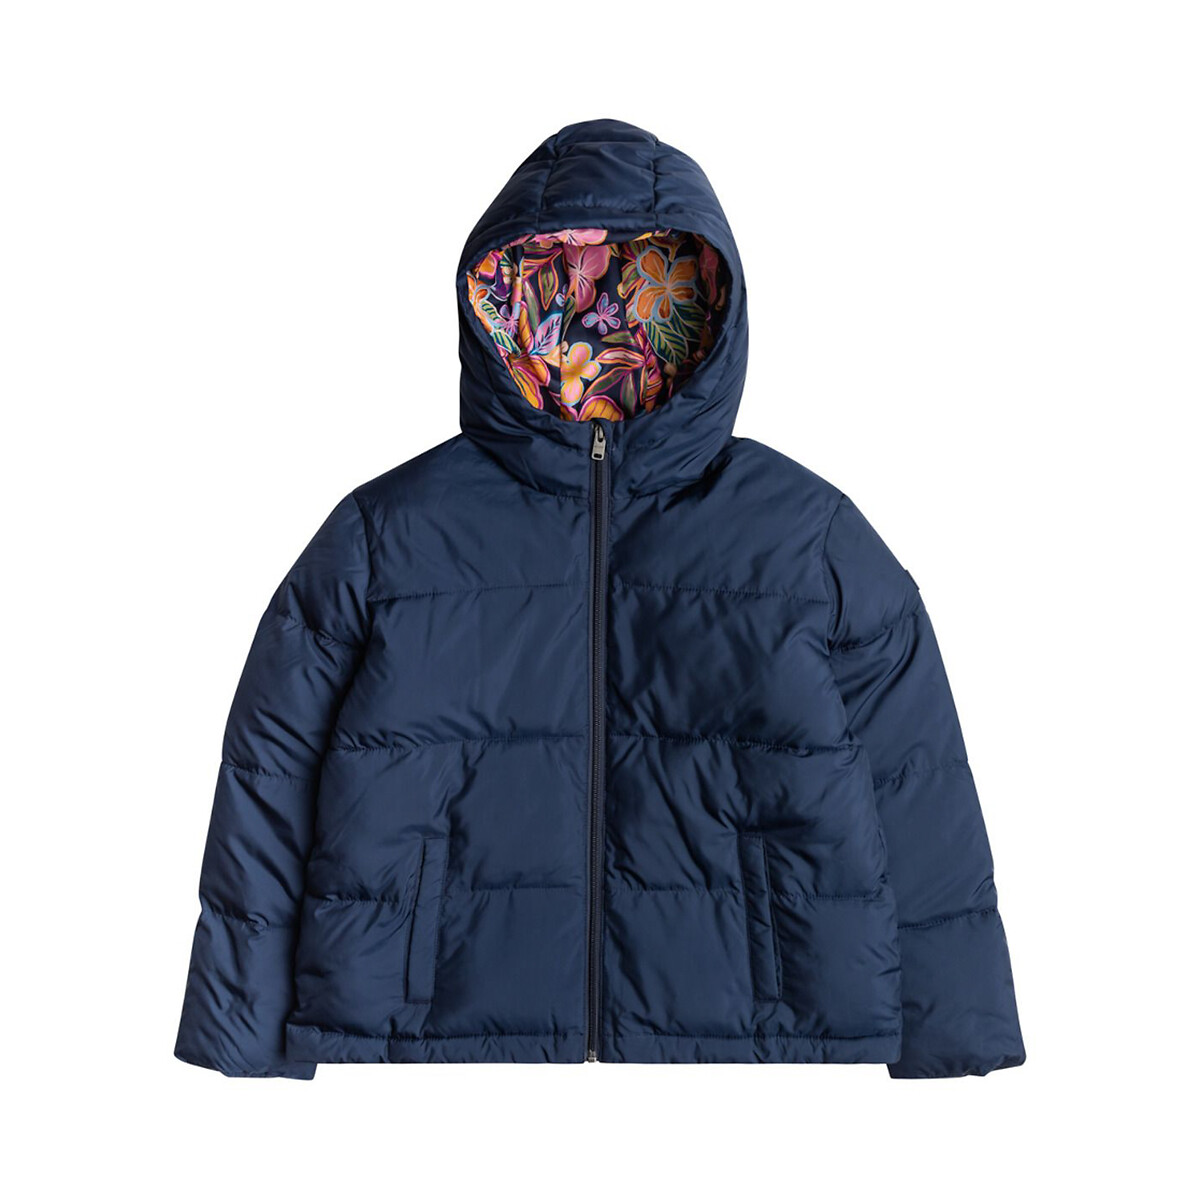 Hooded Padded Puffer Jacket